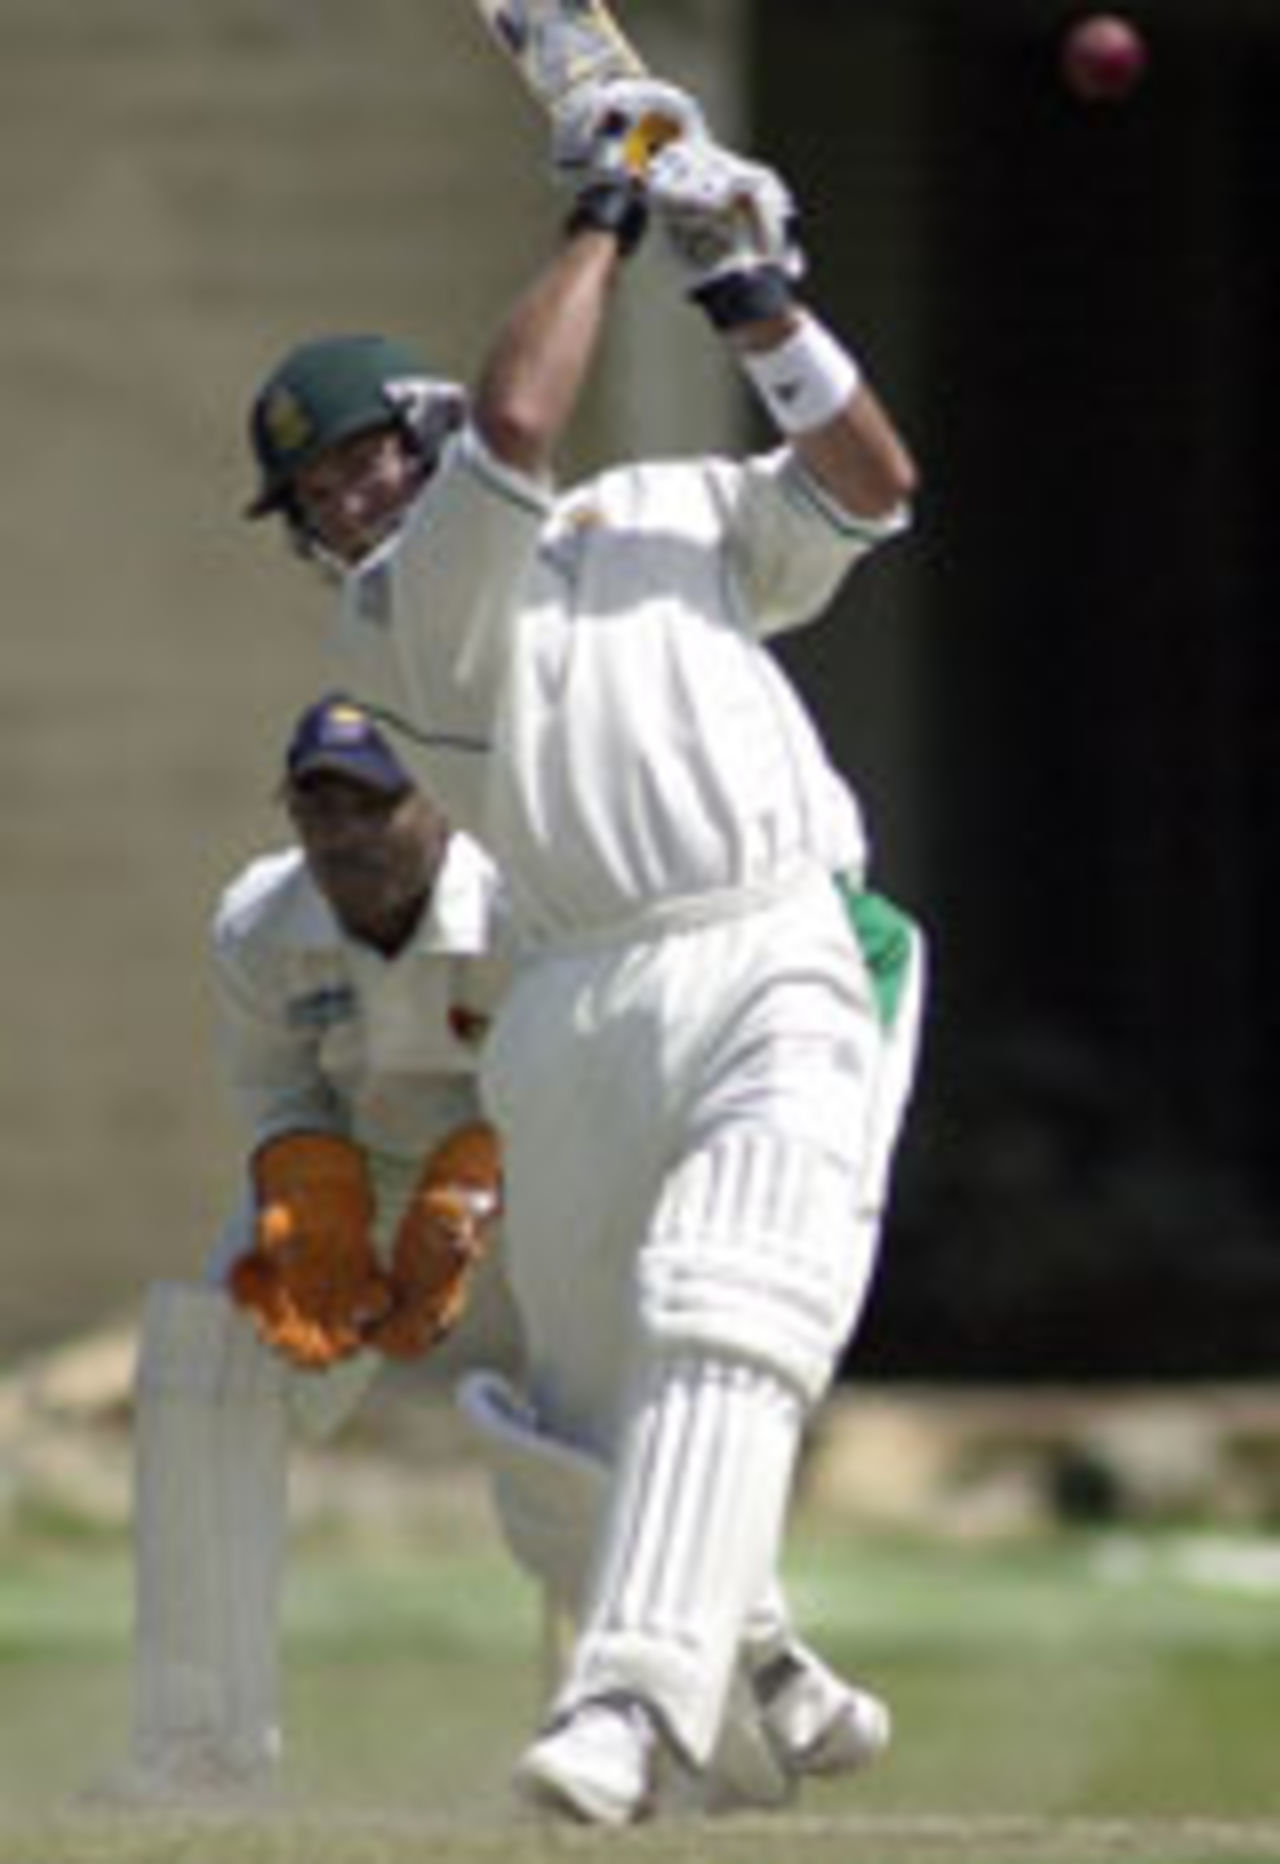 Jacques Kallis cover-drives, SL Board President's XI v South Africans, Colombo, July 31, 2004